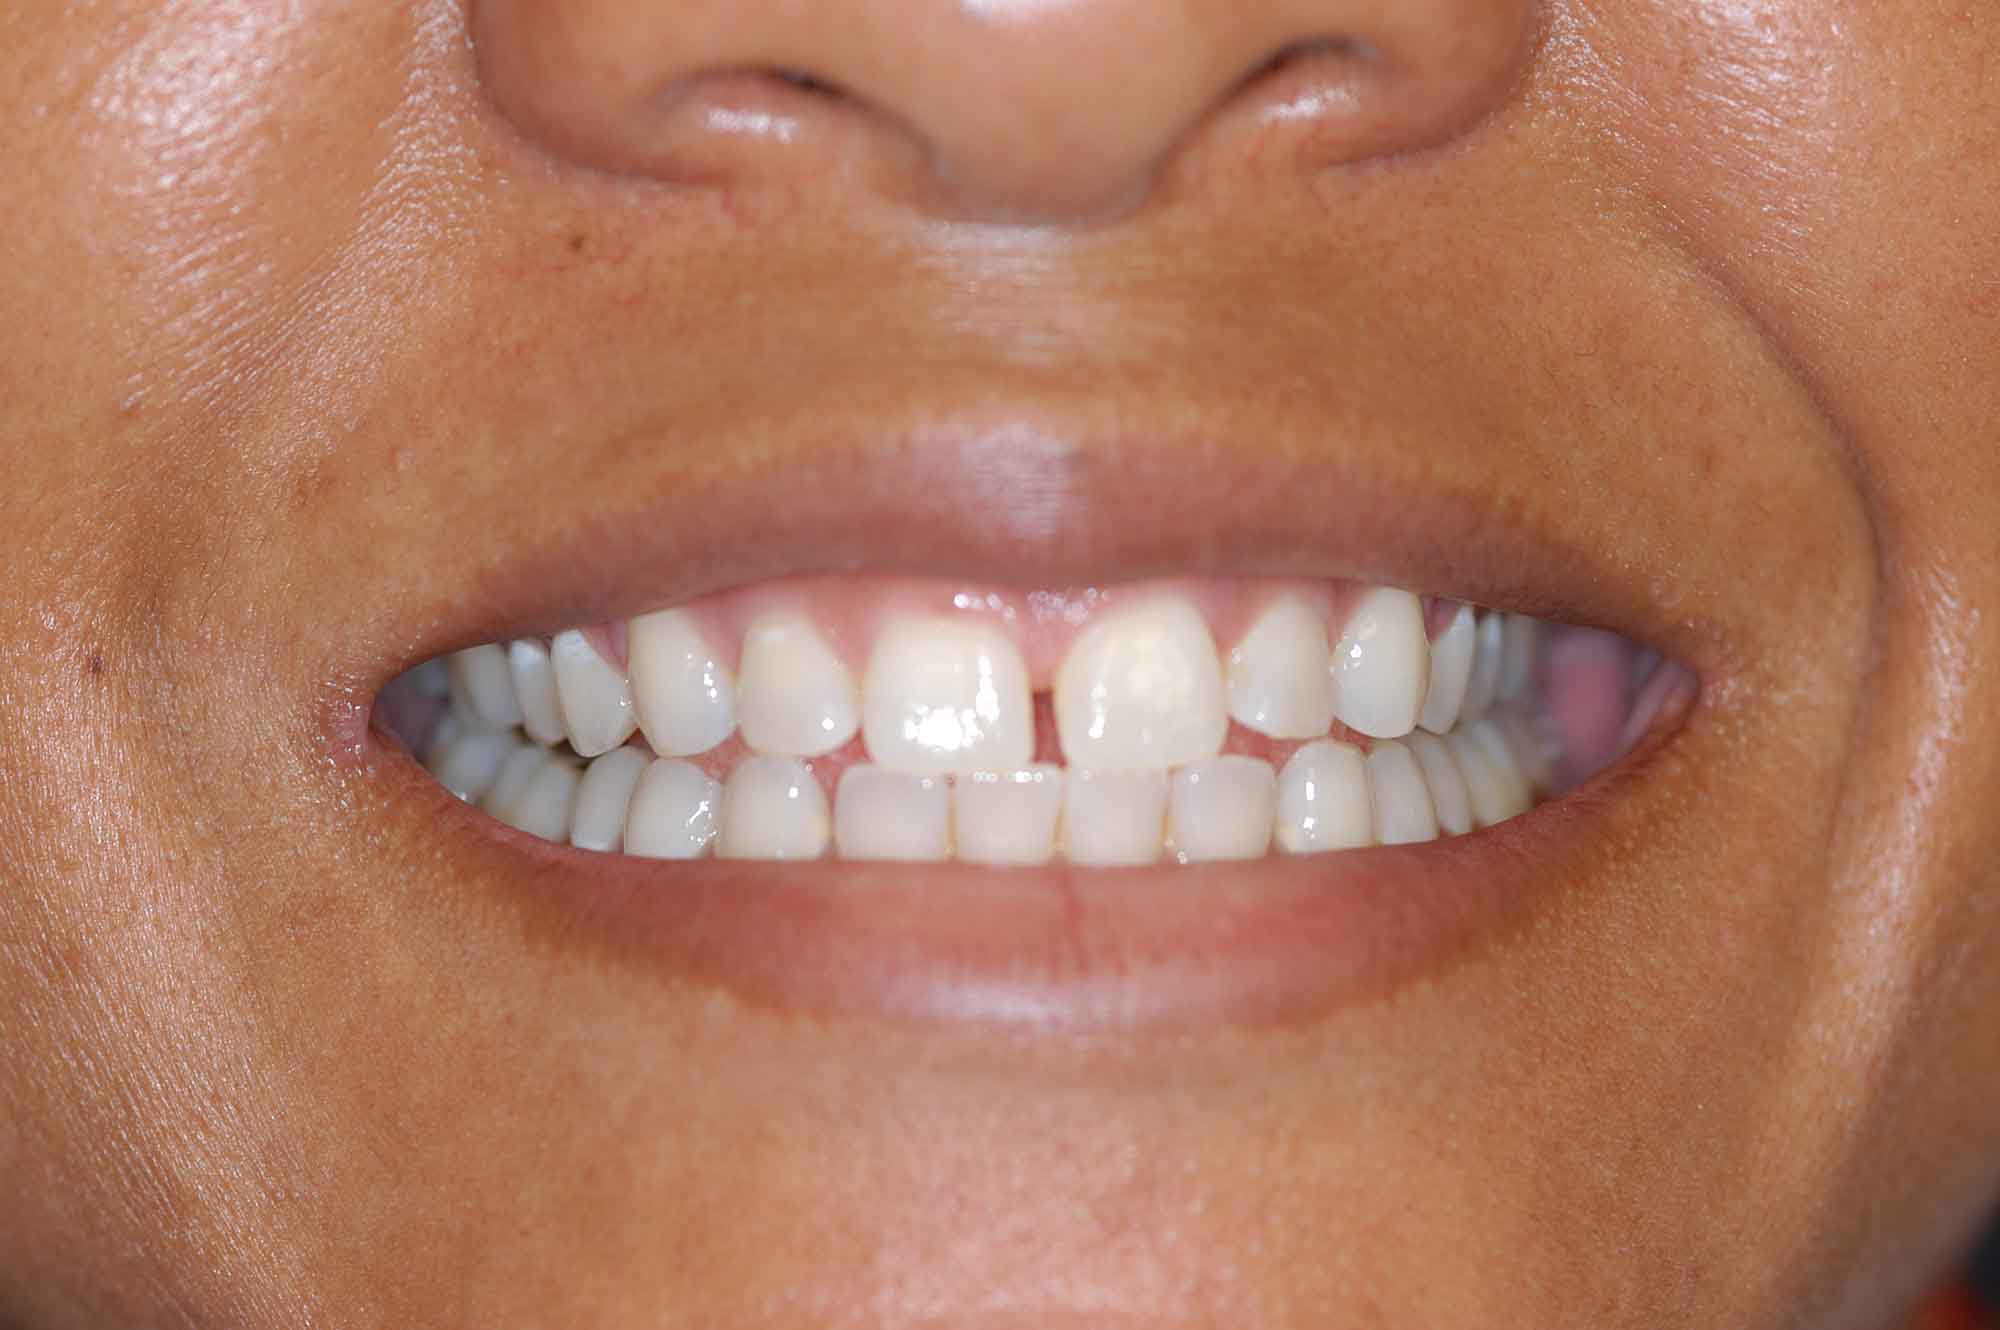 Second example before whitening